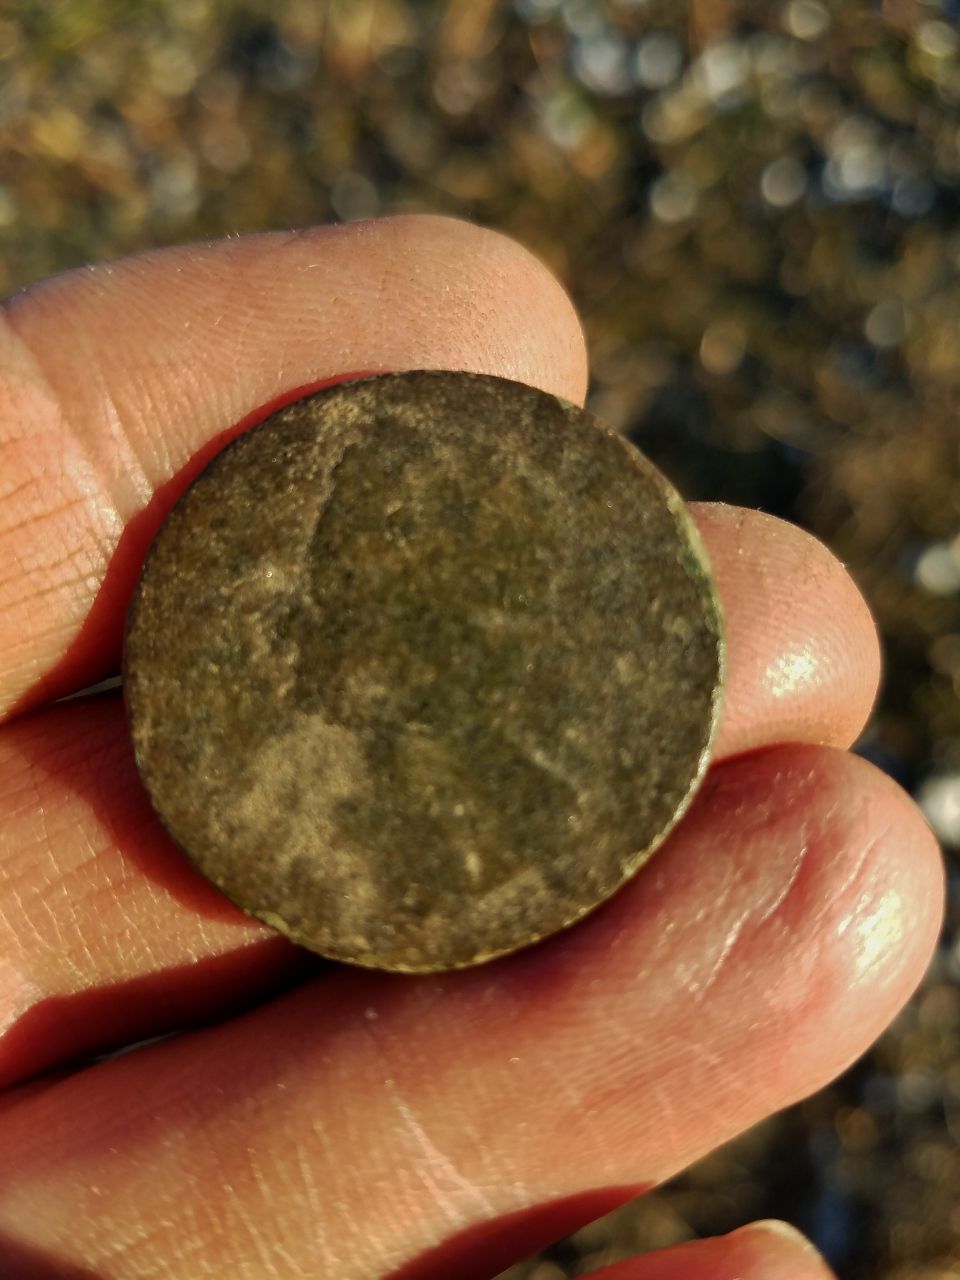 King George II half penny.  The date is worn off but it has the "old head" bust which puts it in the range of 1740-1754.